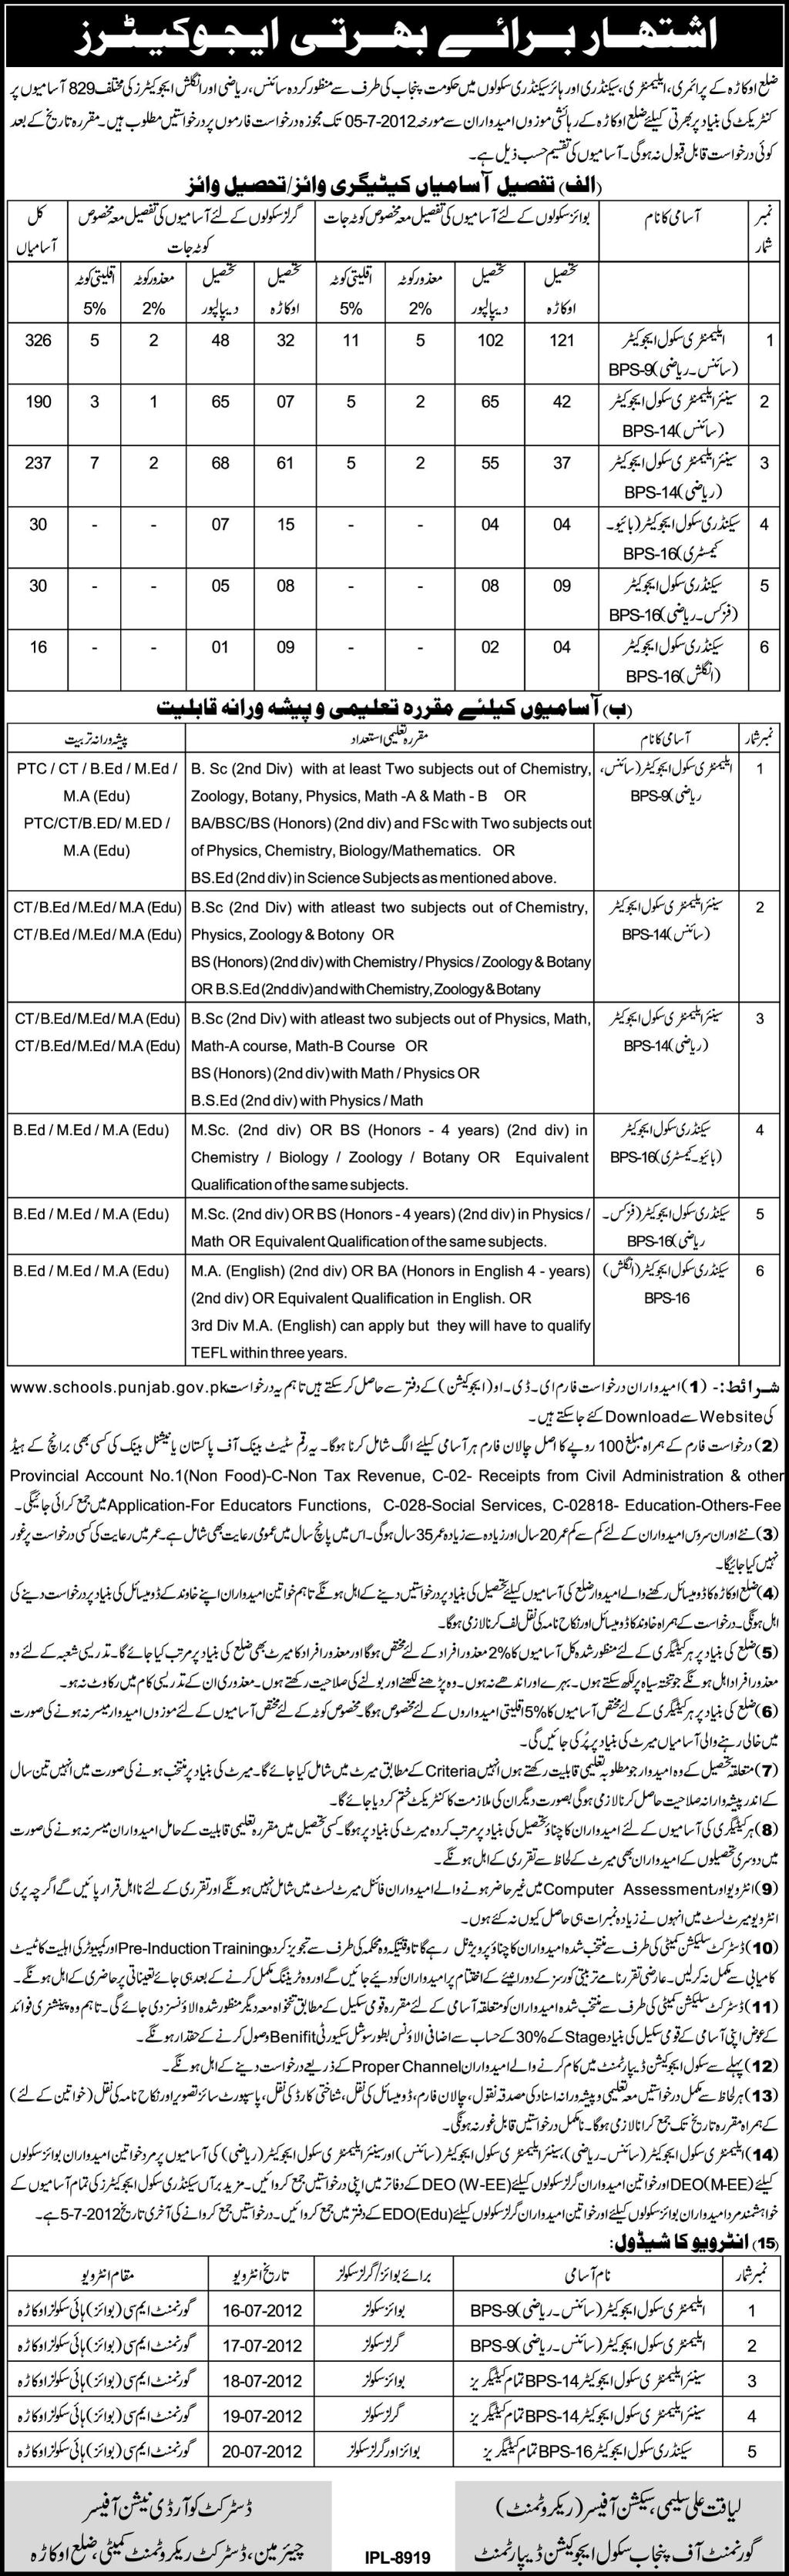 Teachers/Educators Required by Government of Punjab at Primary, Elementary, Secondary and Higher Secondary Schools (Okara District) (829 Vacancies) (Govt. Job)